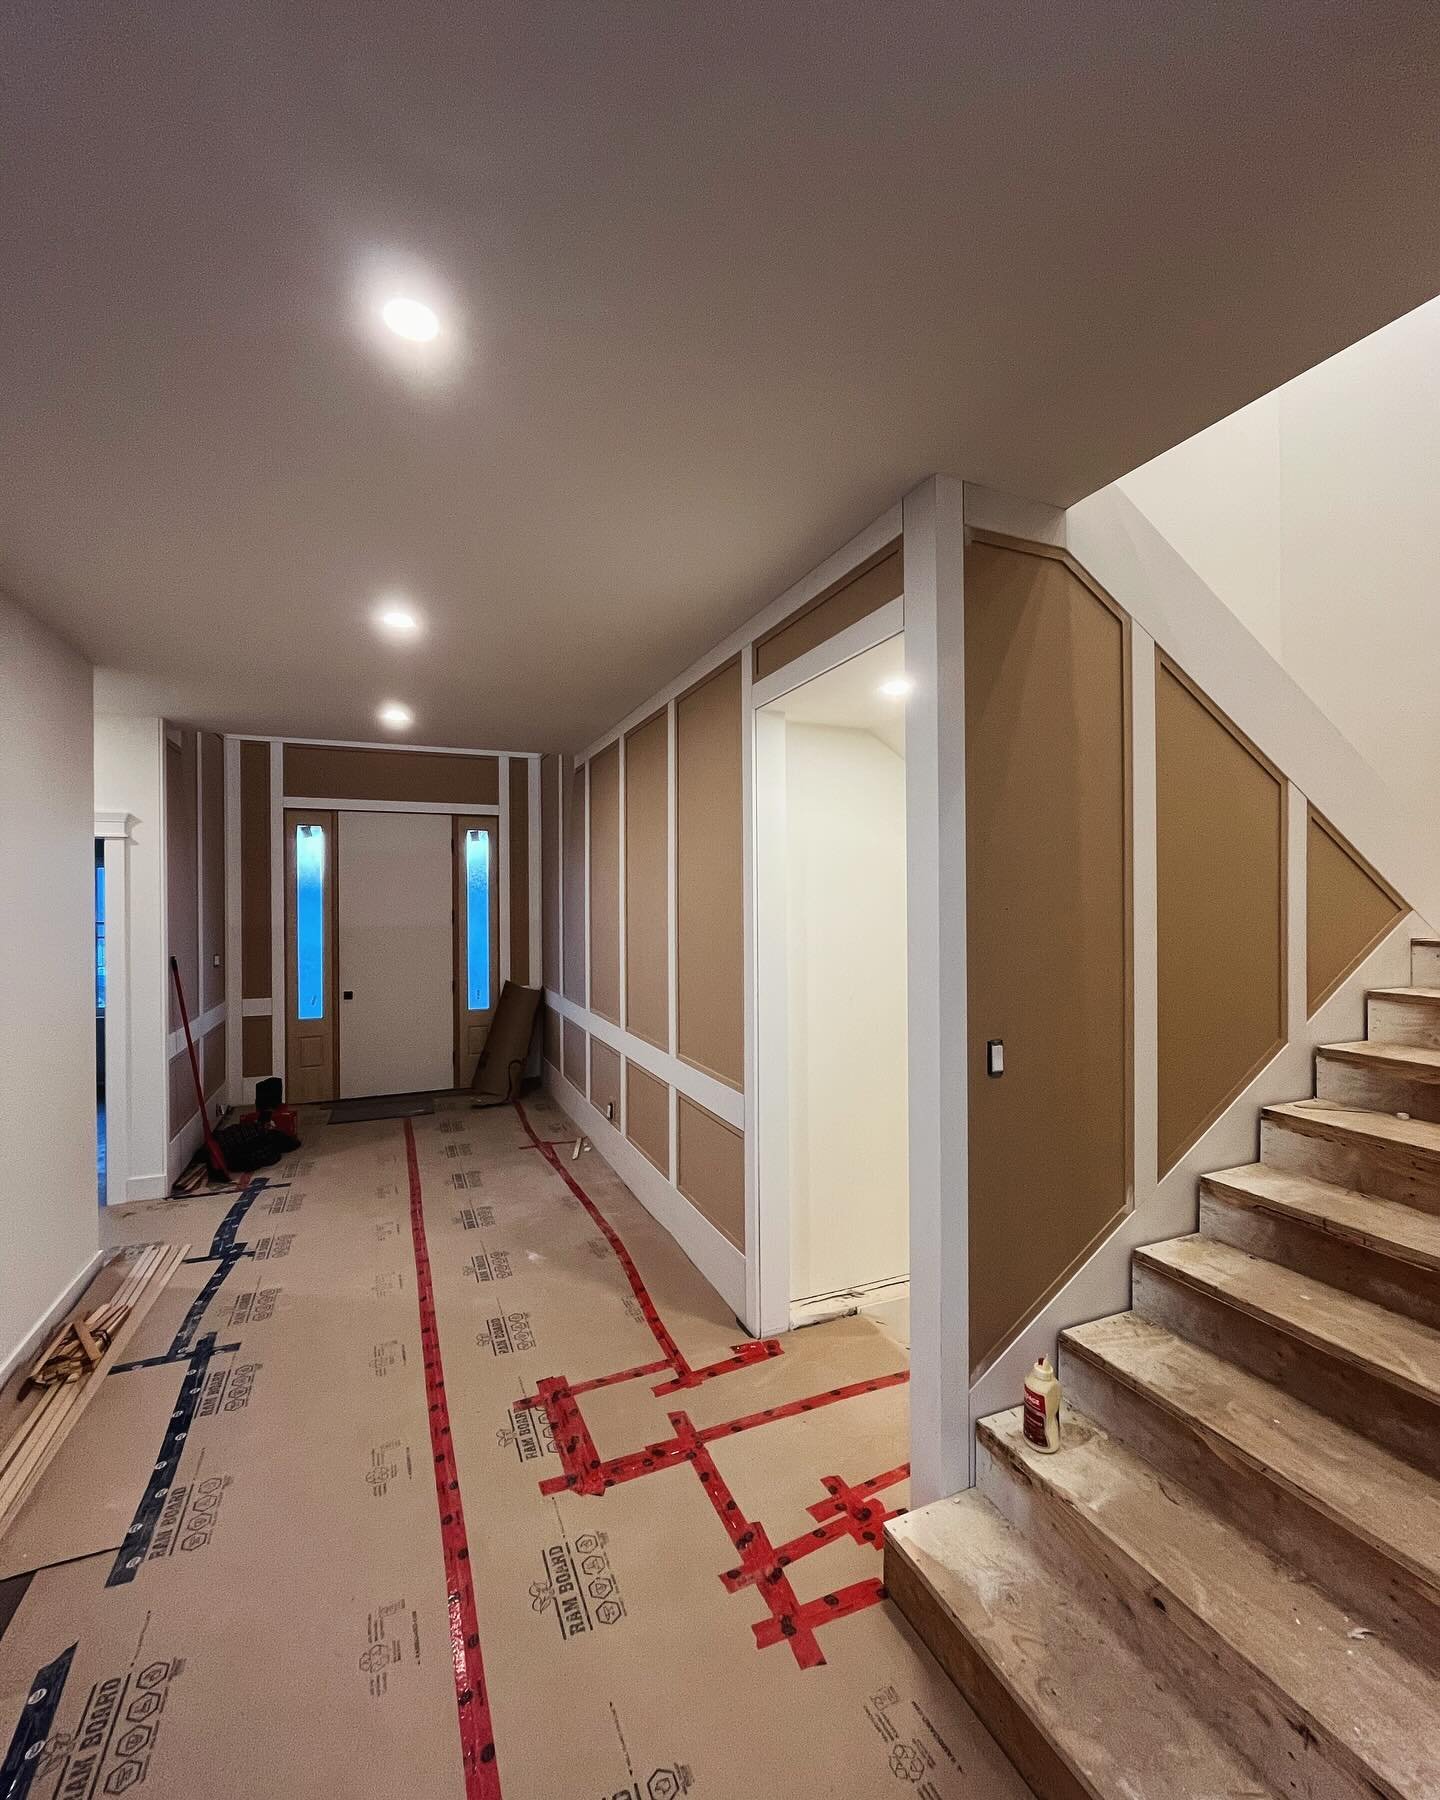 Turning this entry hall and staircase into something to talk about! #yyj #victoriabccanada #victoriarealestate #yyjbusiness #kitchendesign #bathroomdesign #interiordesign #hightideinteriors #yyjrenovations